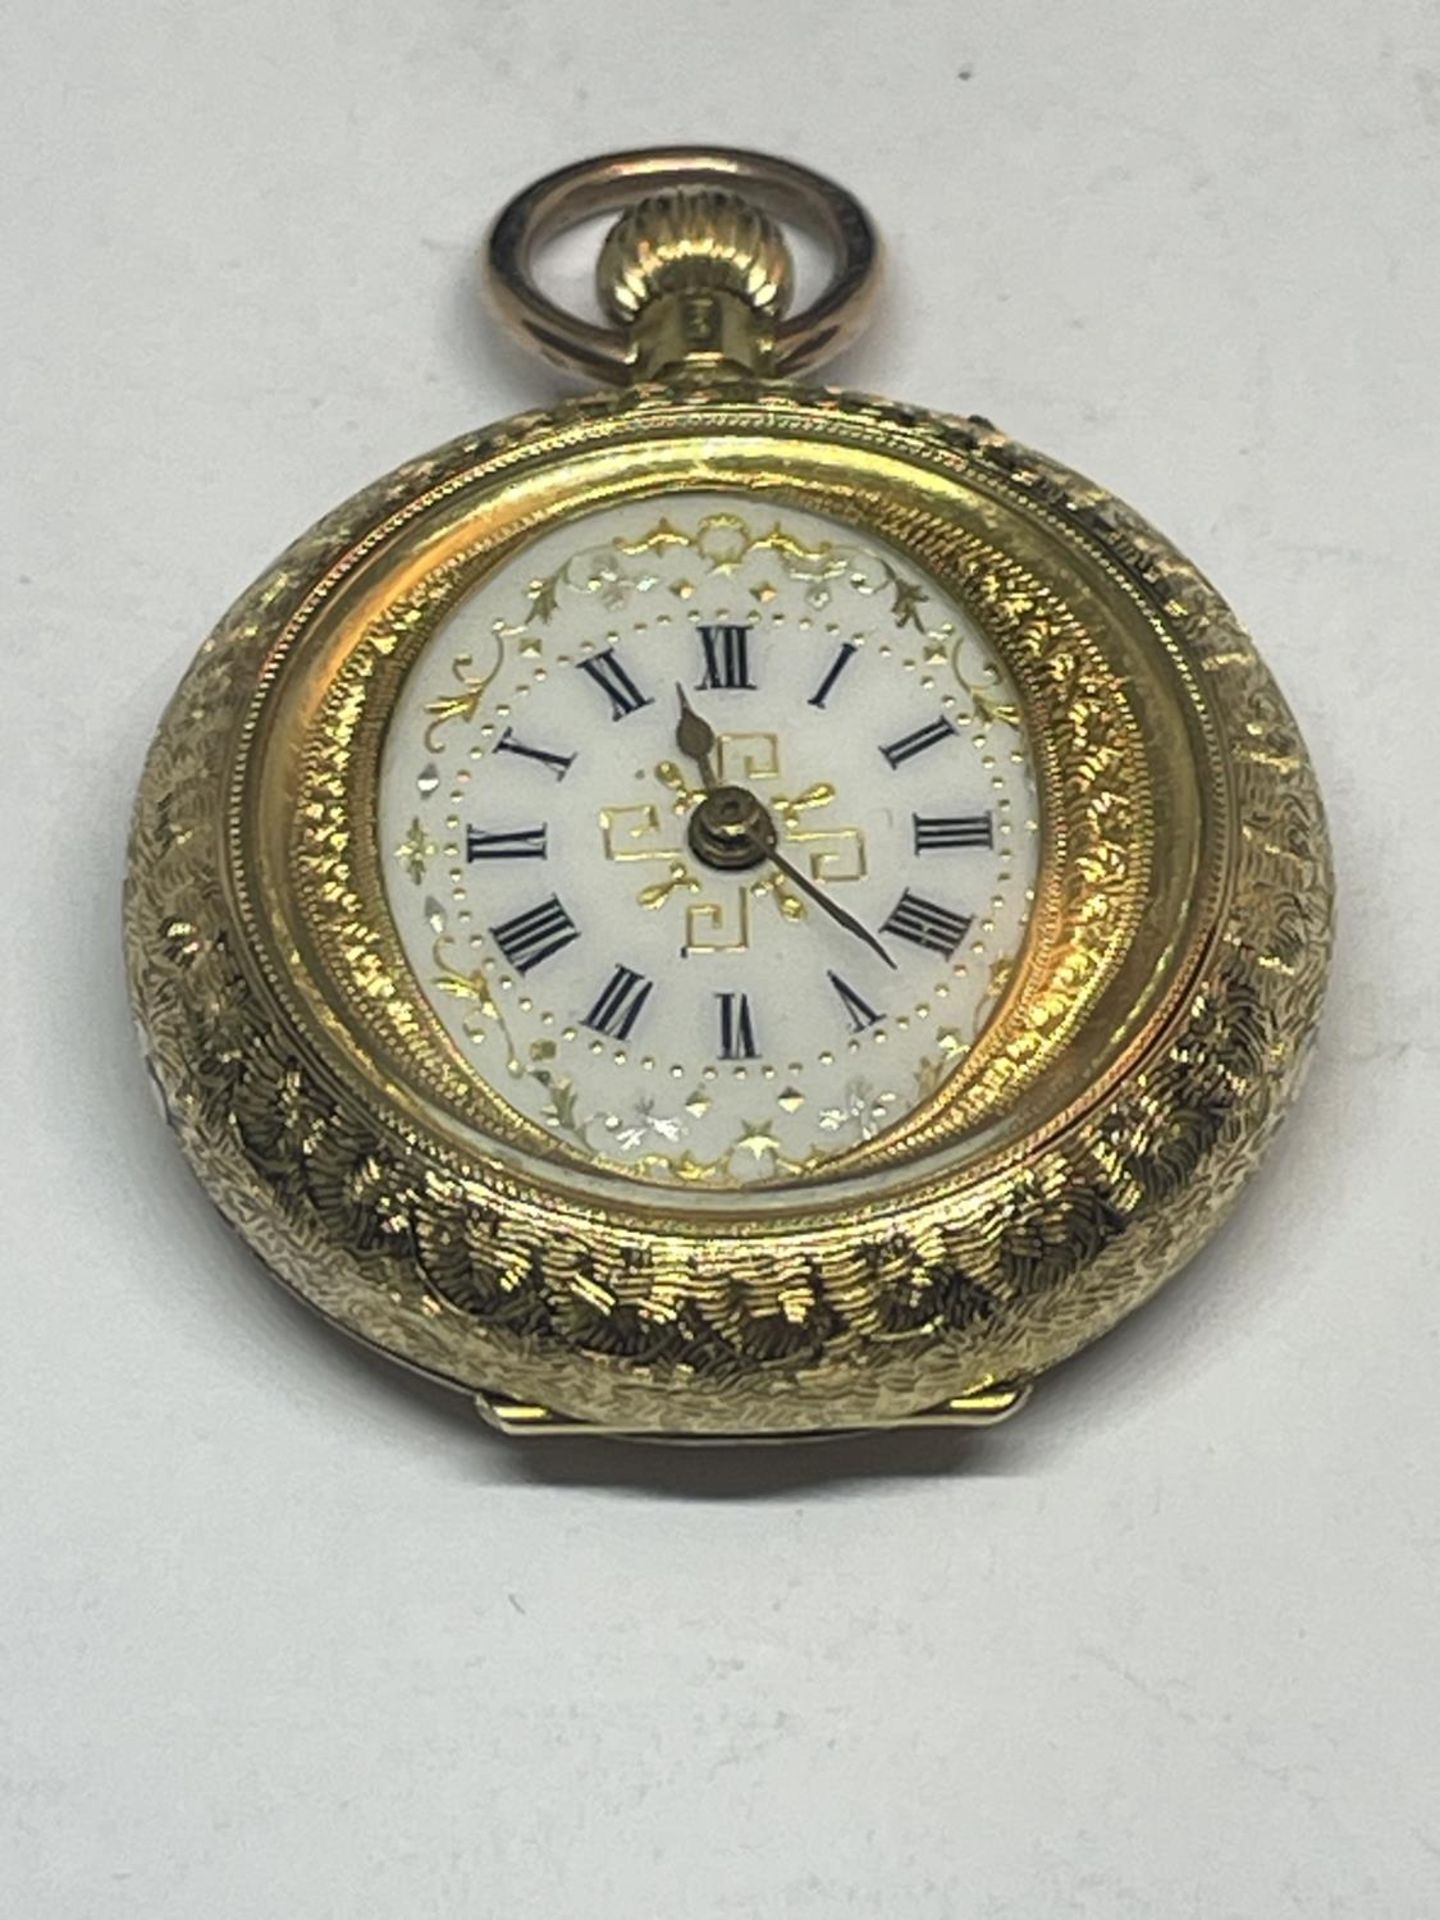 AN ORNATE 18 CARAT GOLD FOB WATCH WITH WHITE ENAMAL FACE AND ROMAN NUMERALS WITH FLOWER DESIGN TO